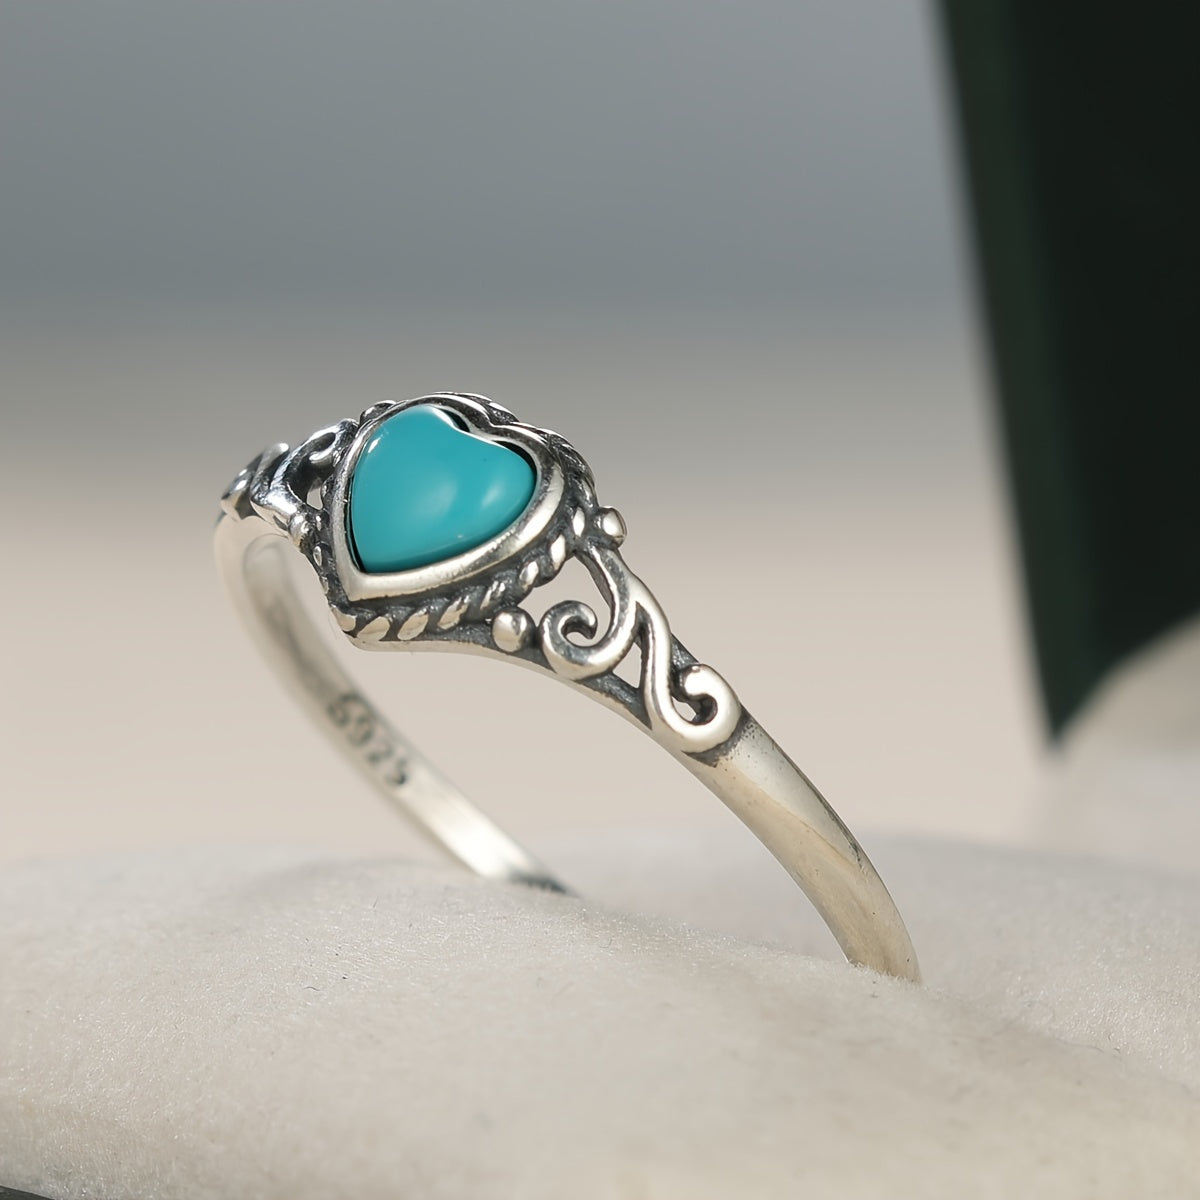 925 Sterling Silver Ring Retro Flower + Heart Design Inlaid Turquoise Symbol Of History And Beauty High Quality Gift For Your Love